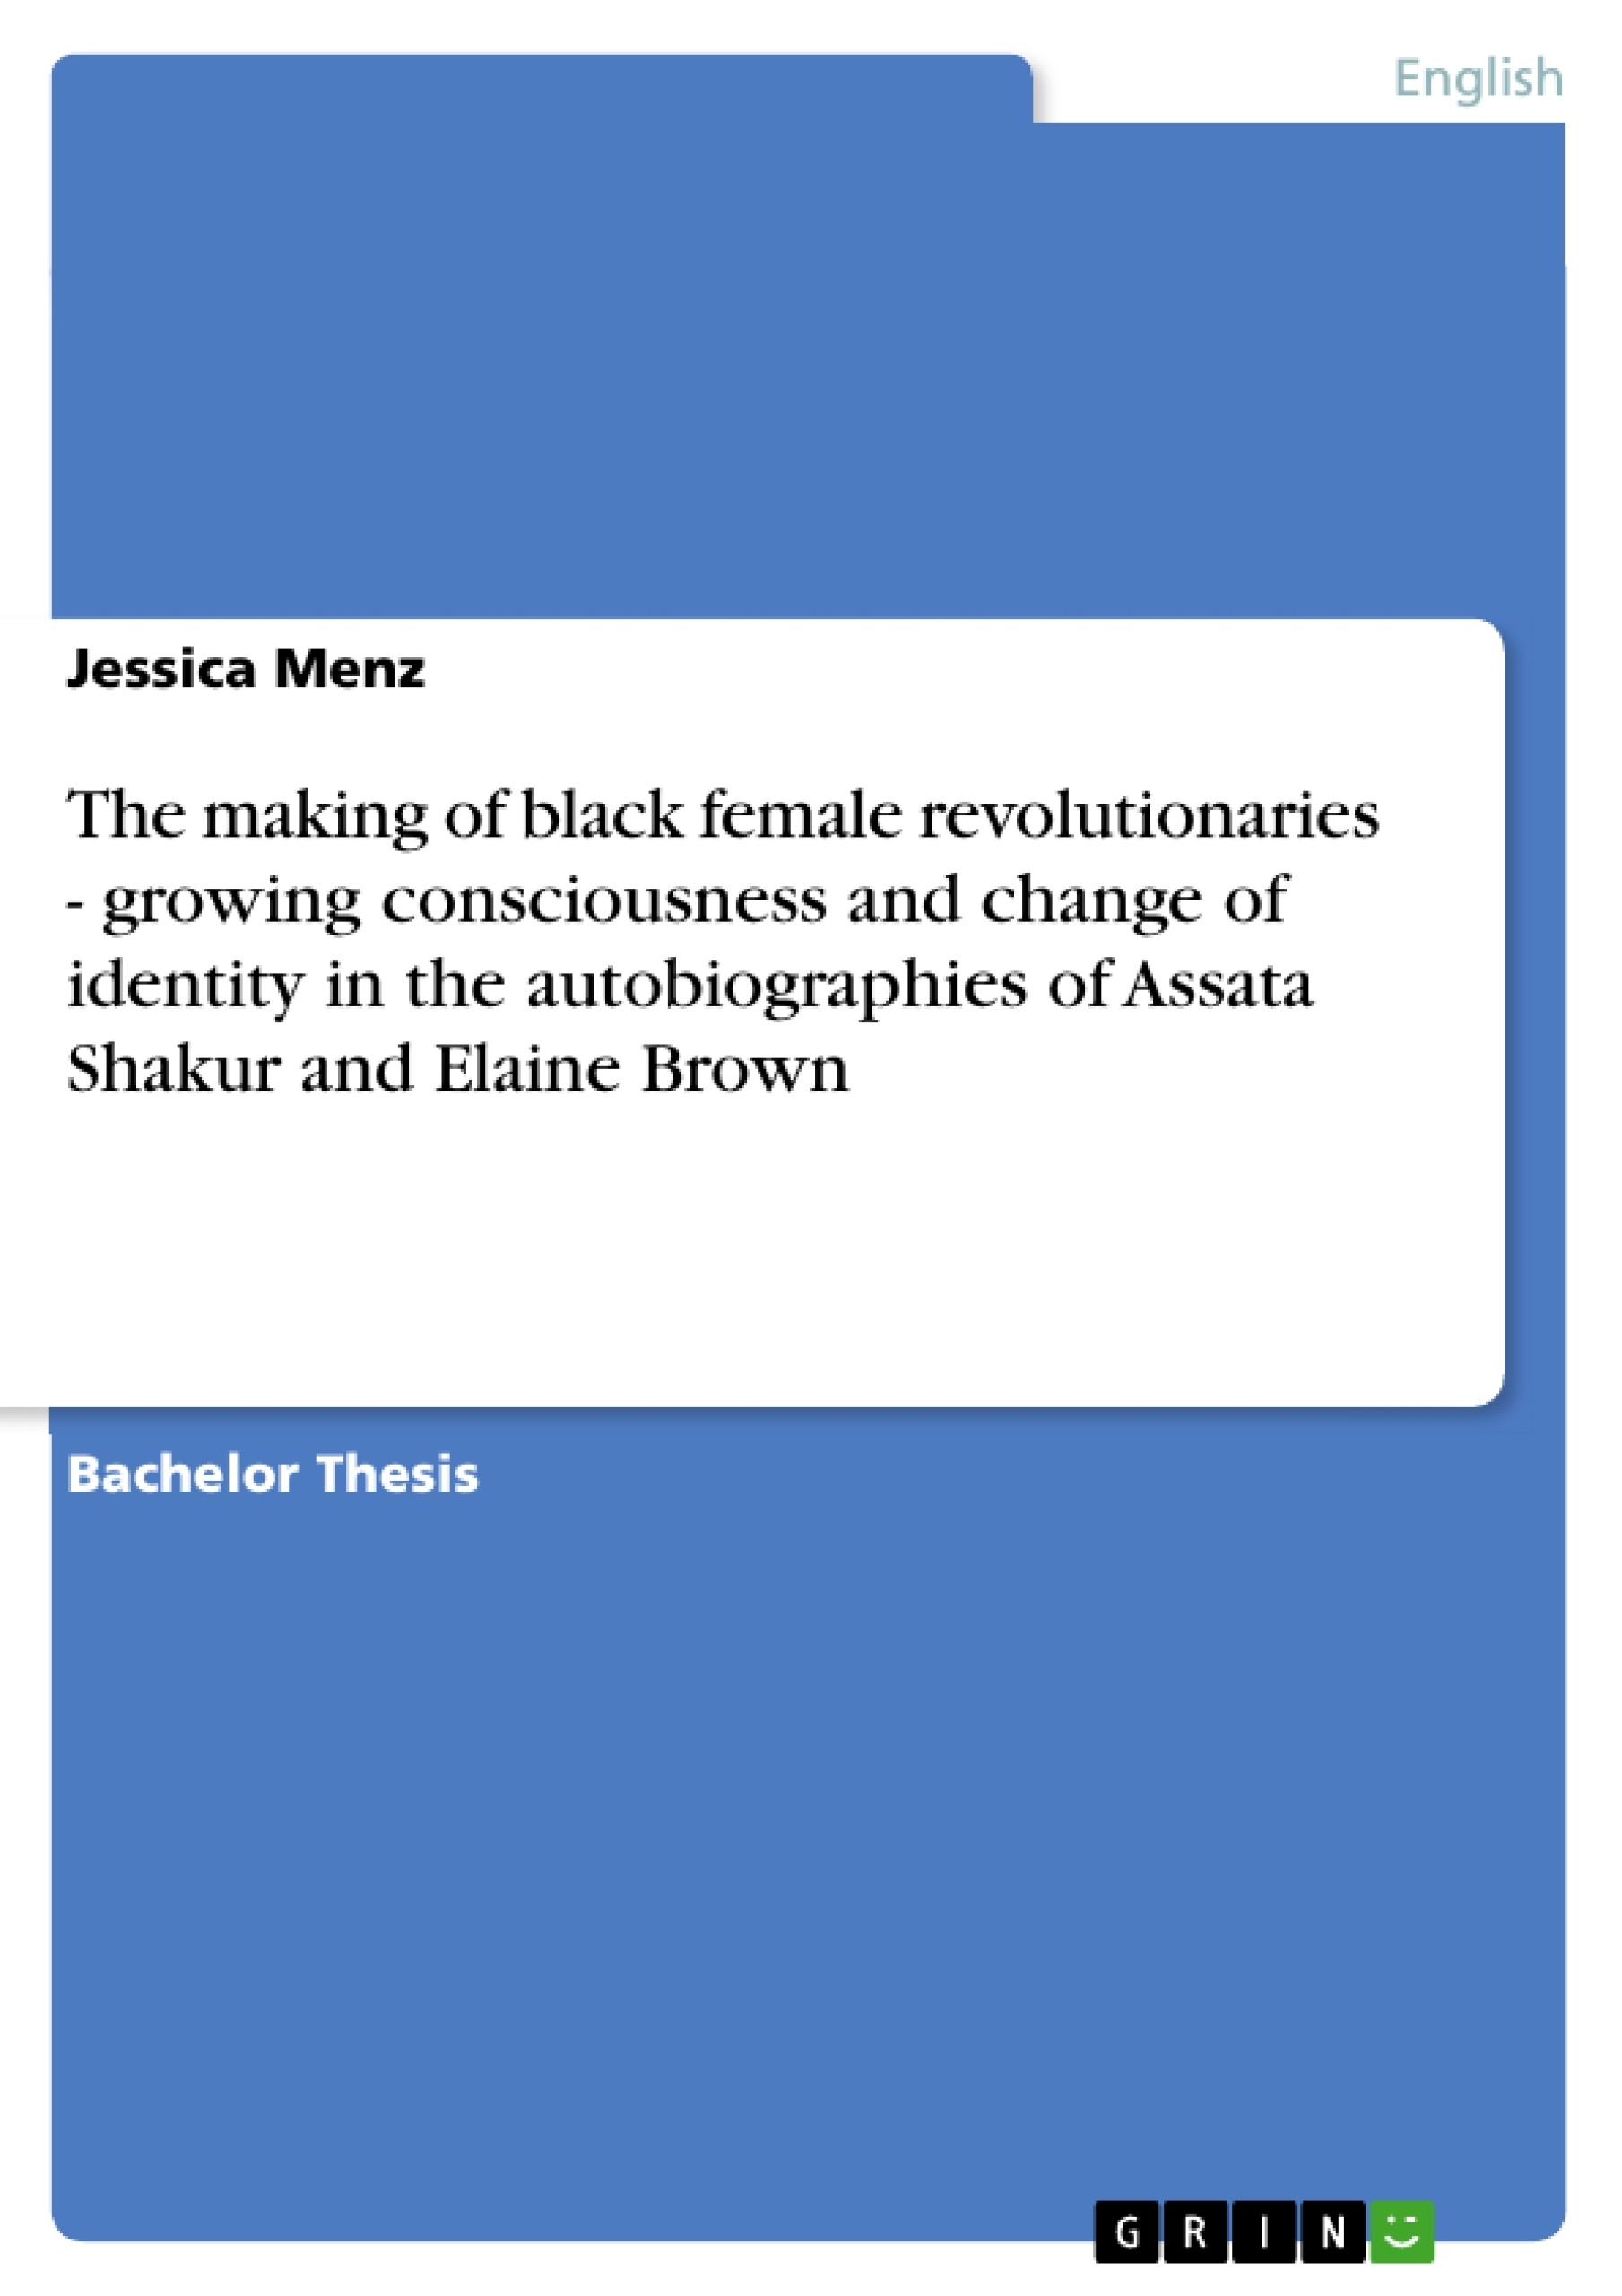 Title: The making of black female revolutionaries - growing consciousness and change of identity in the autobiographies of Assata Shakur and Elaine Brown